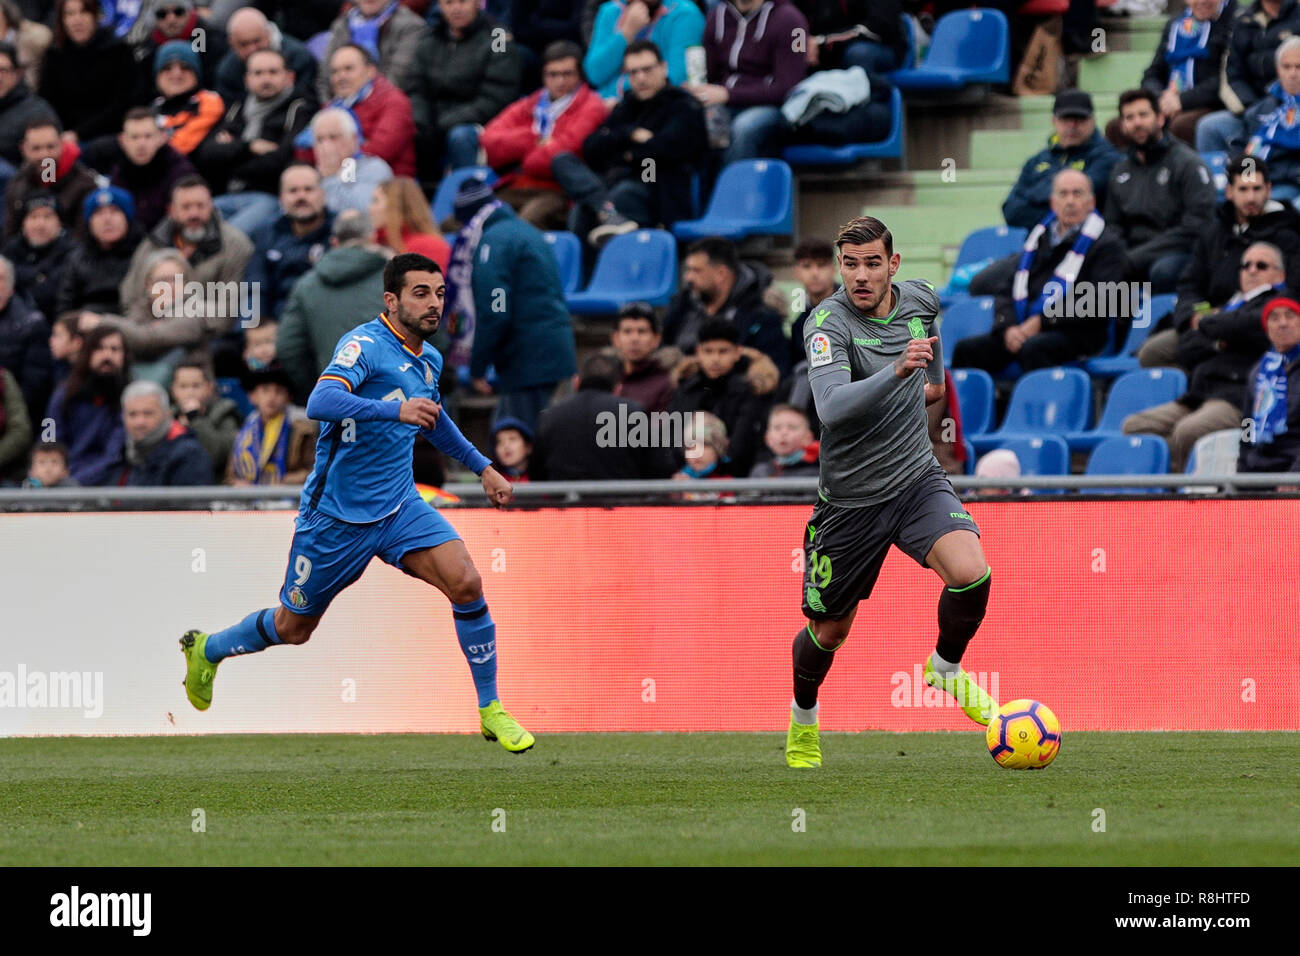 Getafe CF's Angel Rodriguez and Real Sociedad's Theo Hernandez are seen in action during the La Liga football match between Getafe CF and Real Sociedad at the Coliseum Alfonso Perez in Getafe, Spain. ( Final score; Getafe CF 1:0 Real Sociedad ) Stock Photo